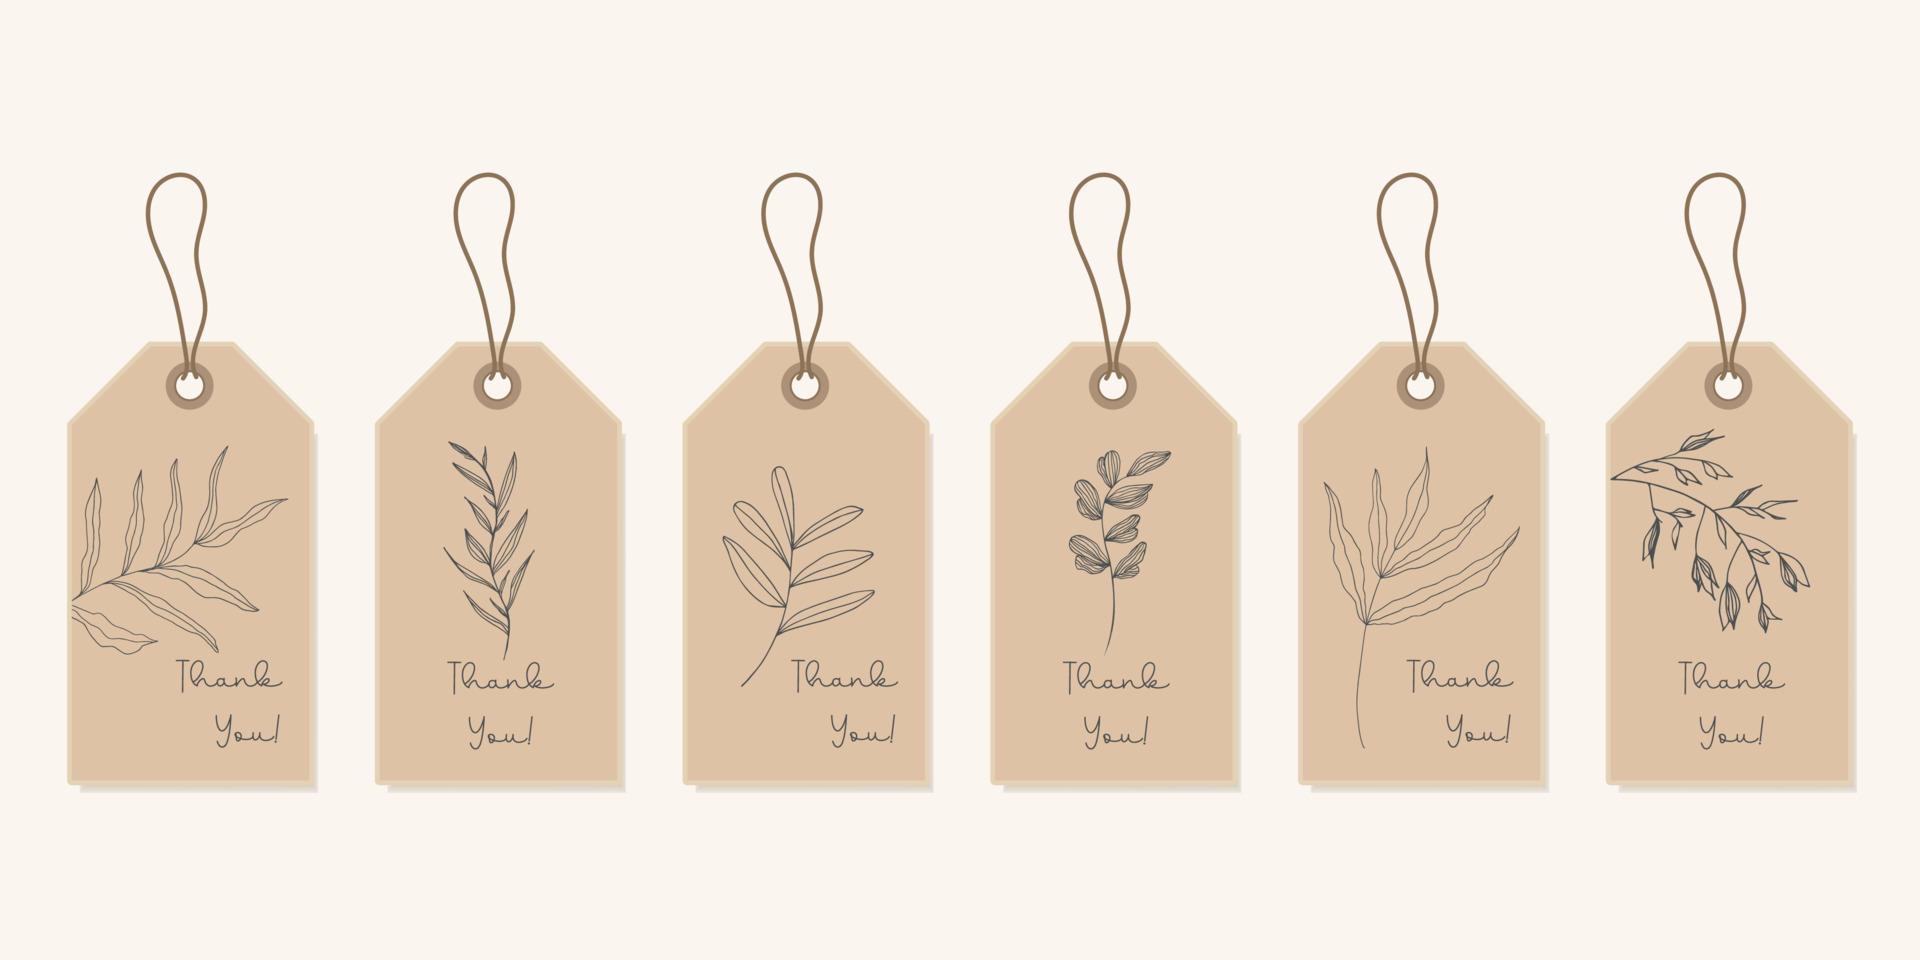 Set of plant illustrations . Minimalist labels for insulated leaf tags. A hand-drawn natural sign for a product tag in a simple rustic design. vector